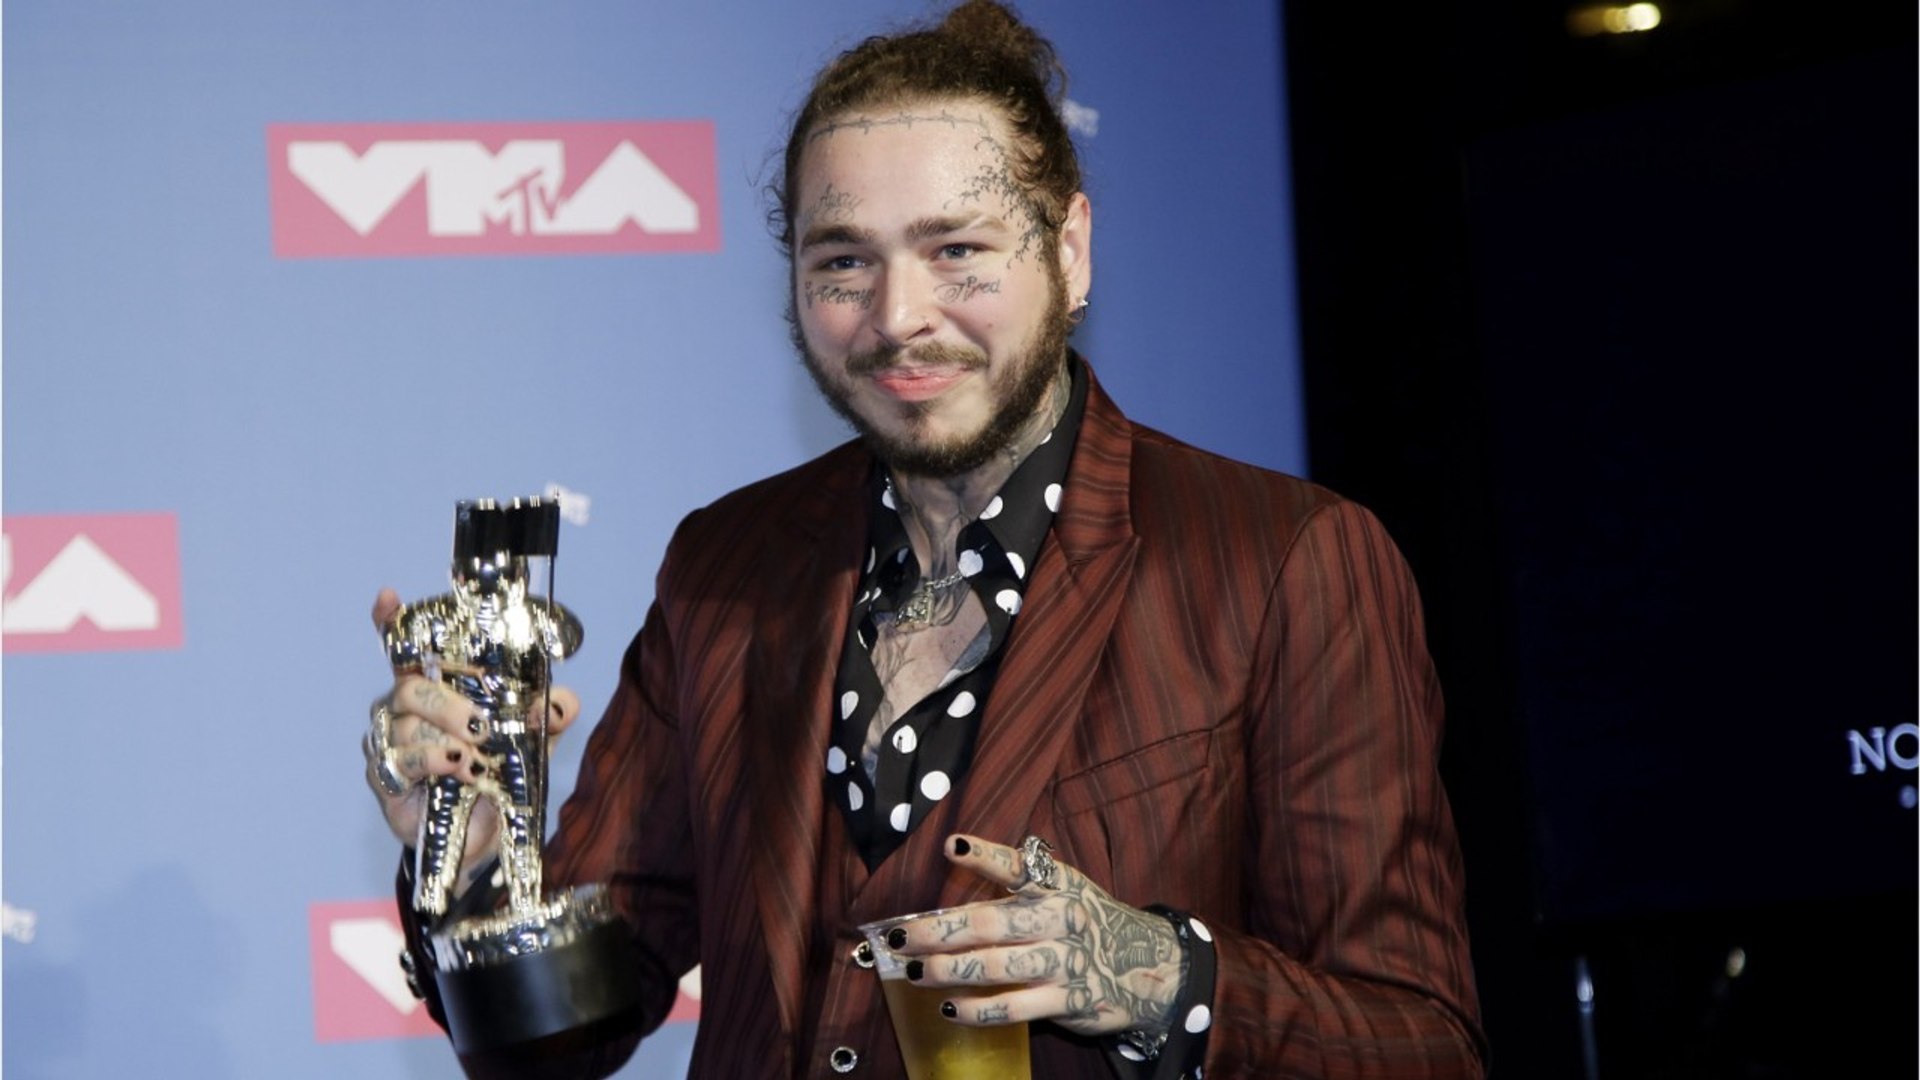 ⁣Plane With Rapper Post Malone On it Lands With Blown Tires